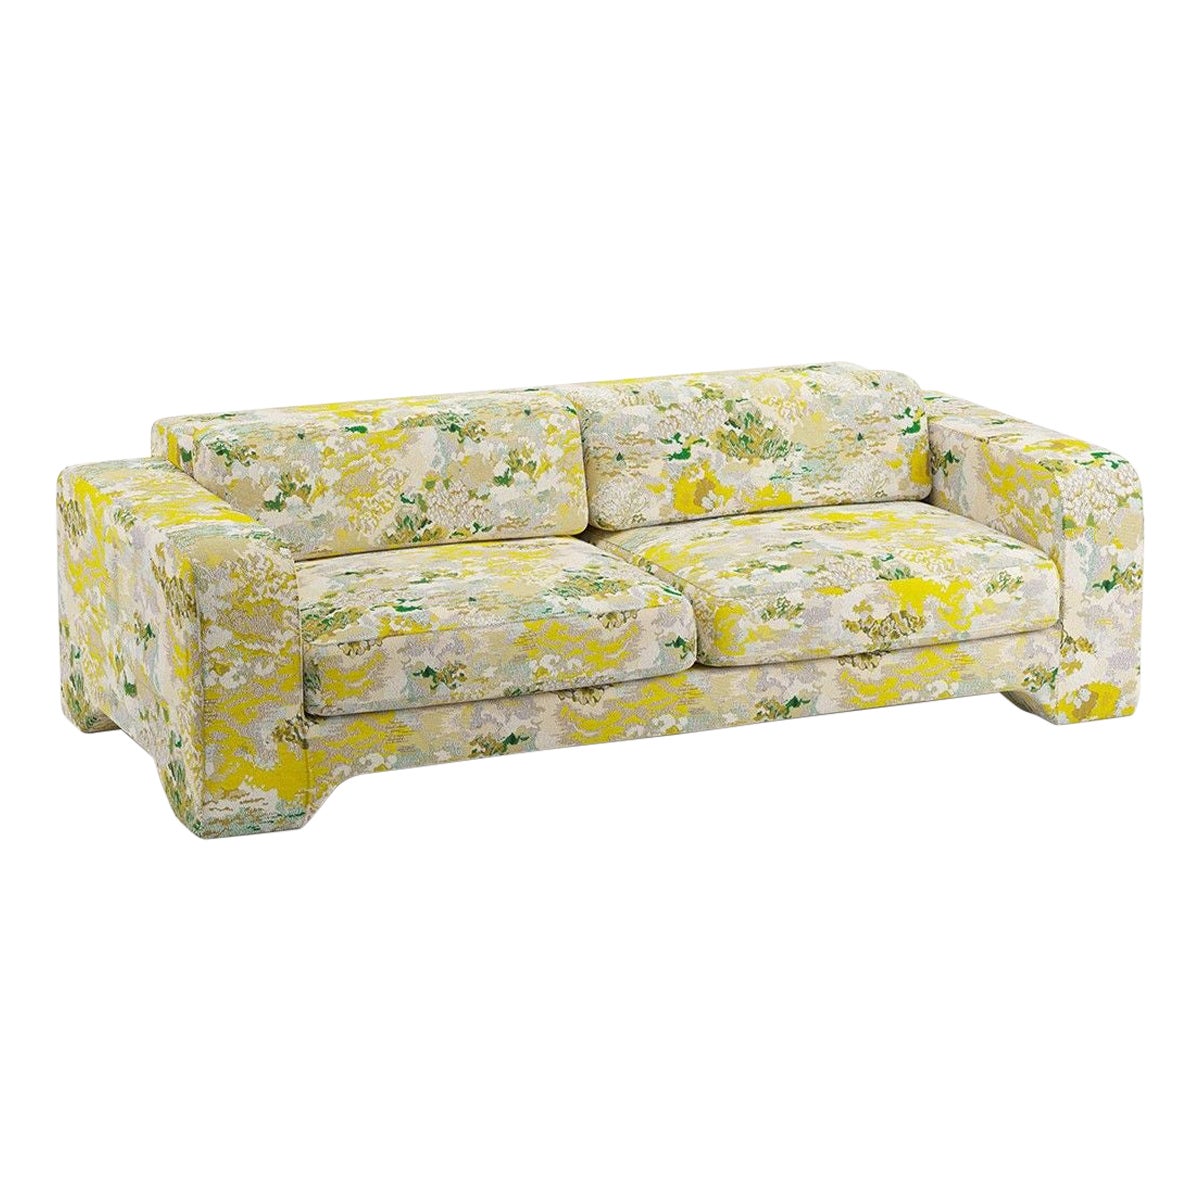 Popus Editions Giovanna 4 Seater Sofa in Citrine Marrakech Jacquard Fabric For Sale